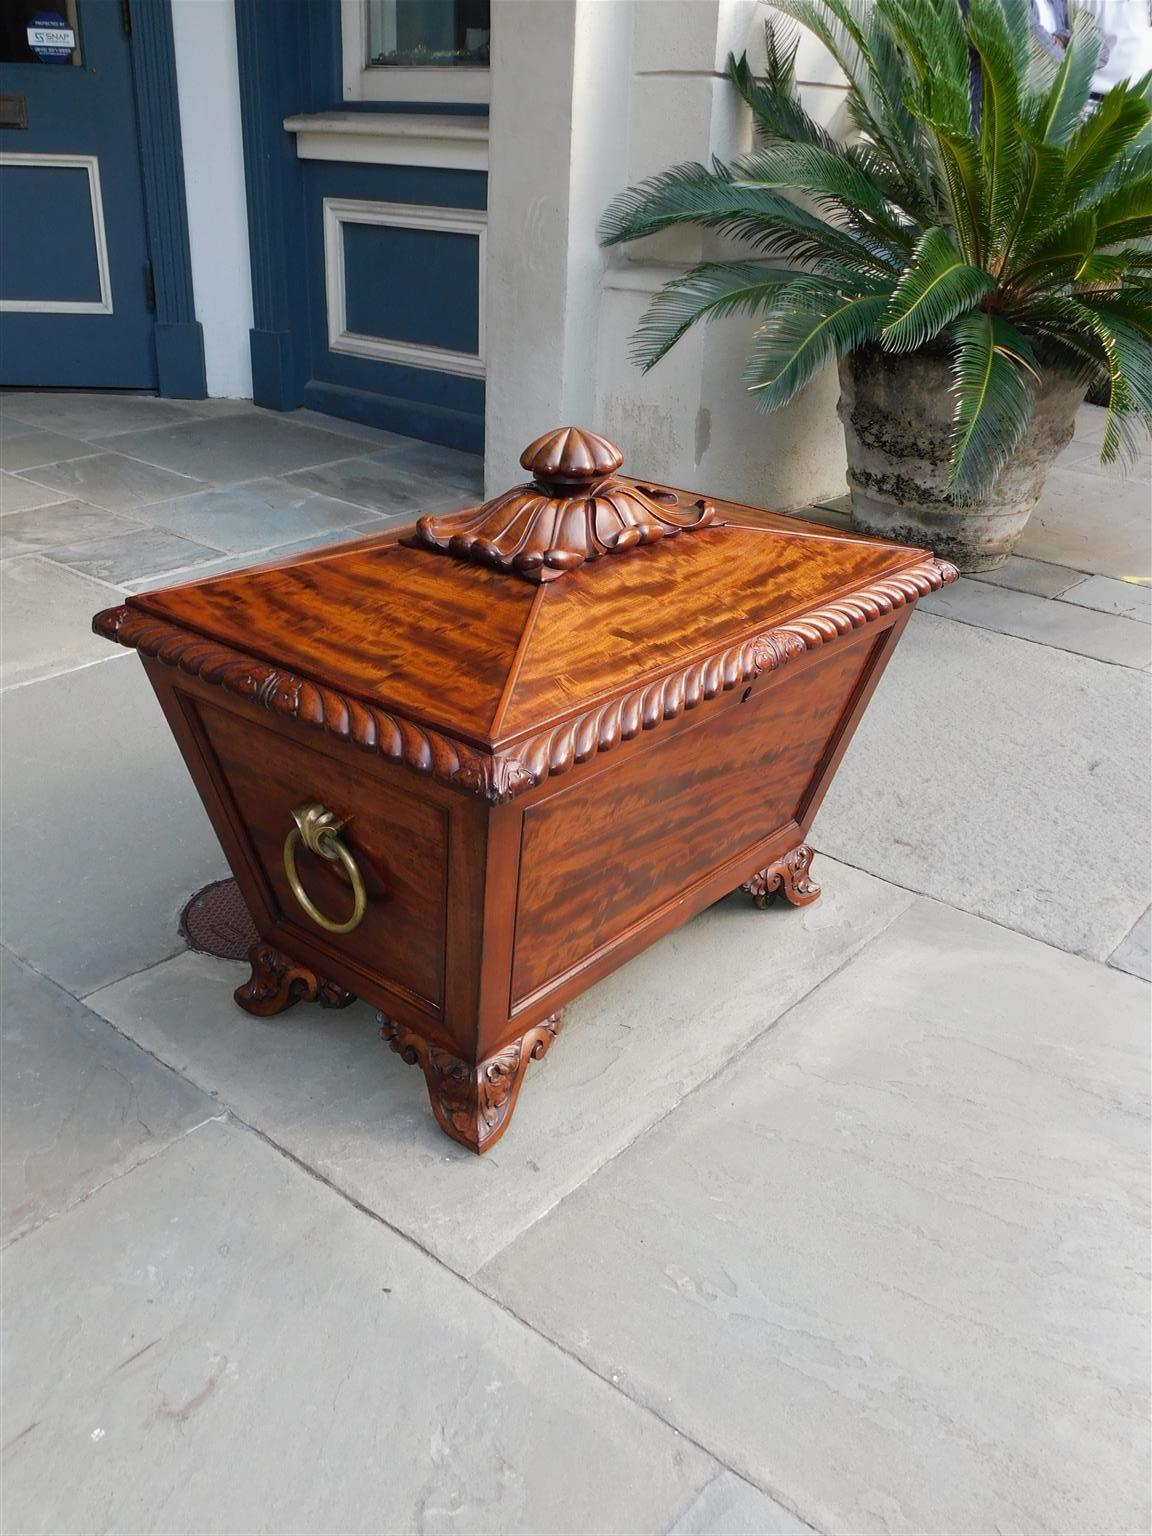 Scottish Regency mahogany hinged cellarette with foliage cartouche, gadrooned molded edge, original brass circular side handles, lead lined interior with stopper, and resting on carved foliage scrolled triangular feet with the original brass